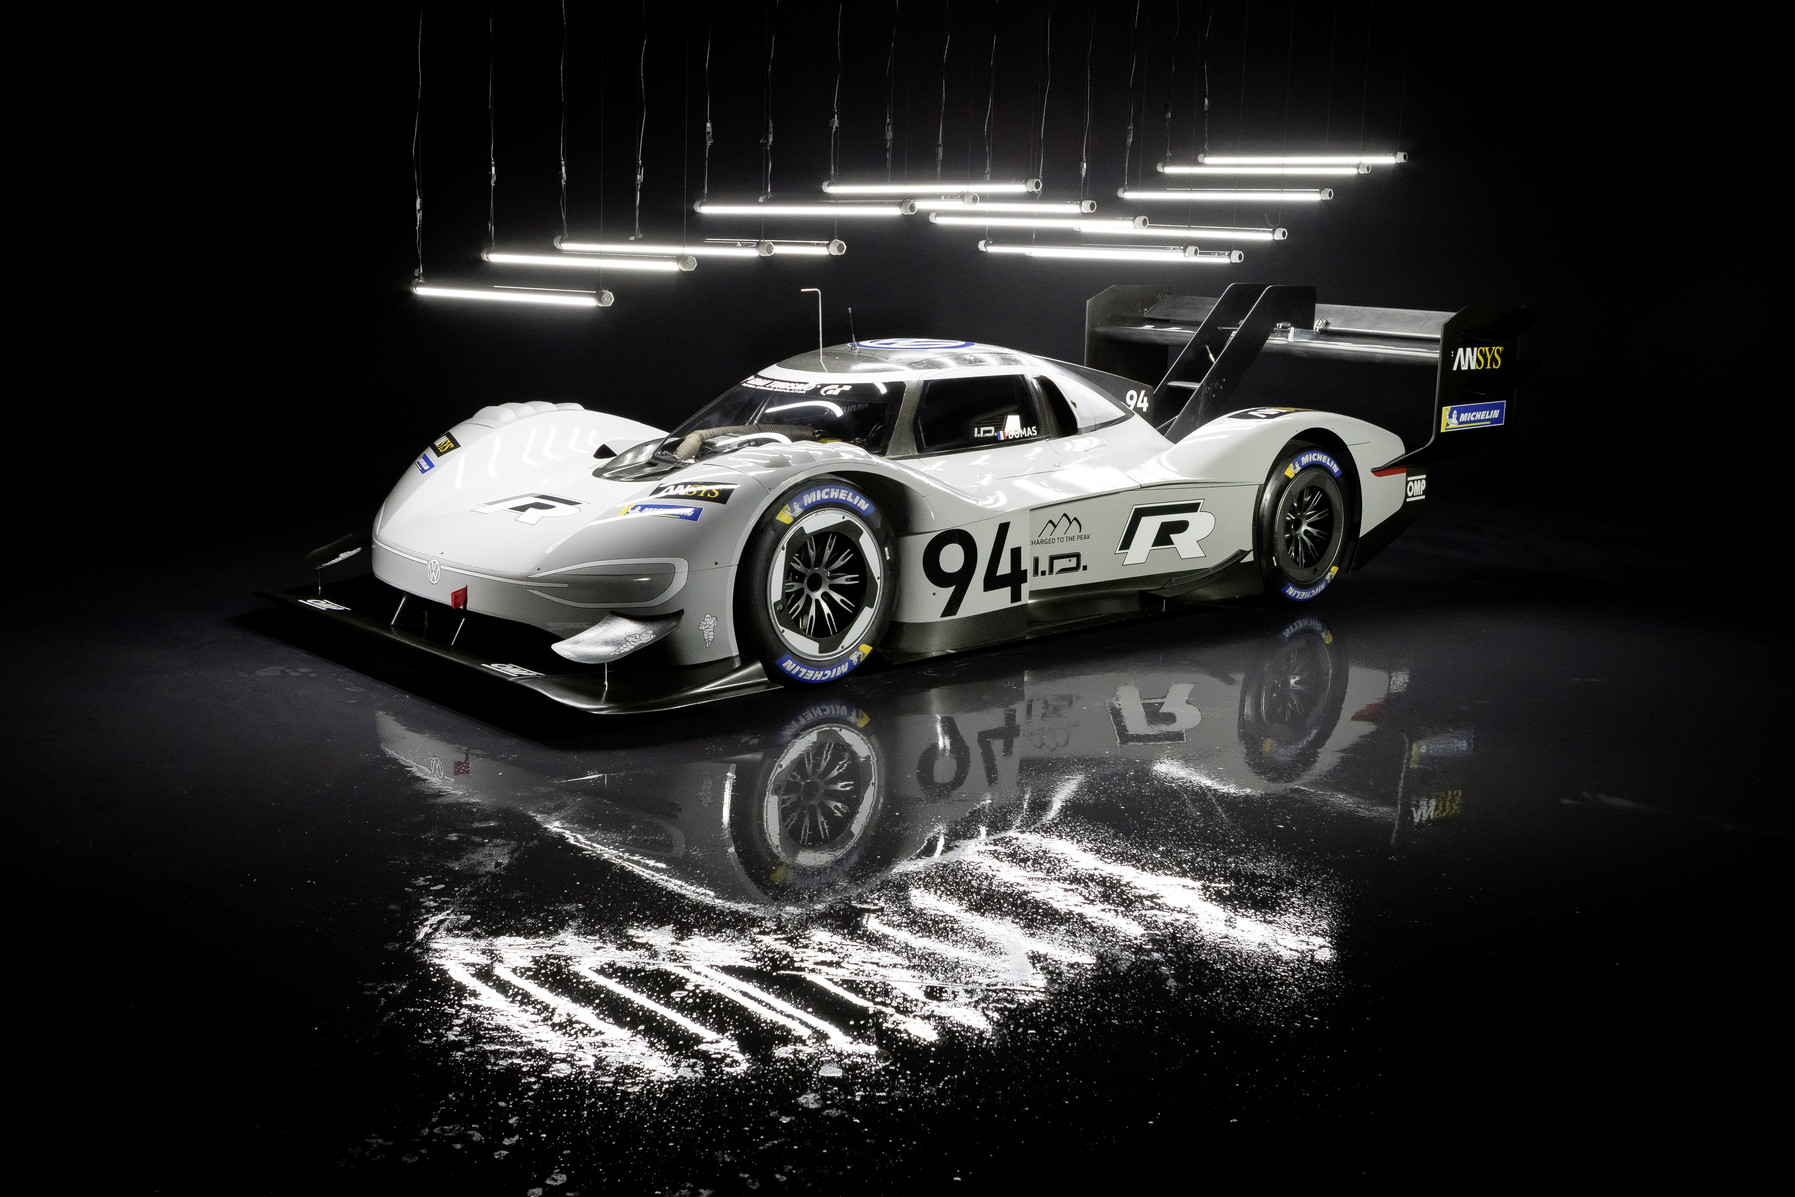 Electrifying a wide audience: Volkswagen ID. R crowned “Race